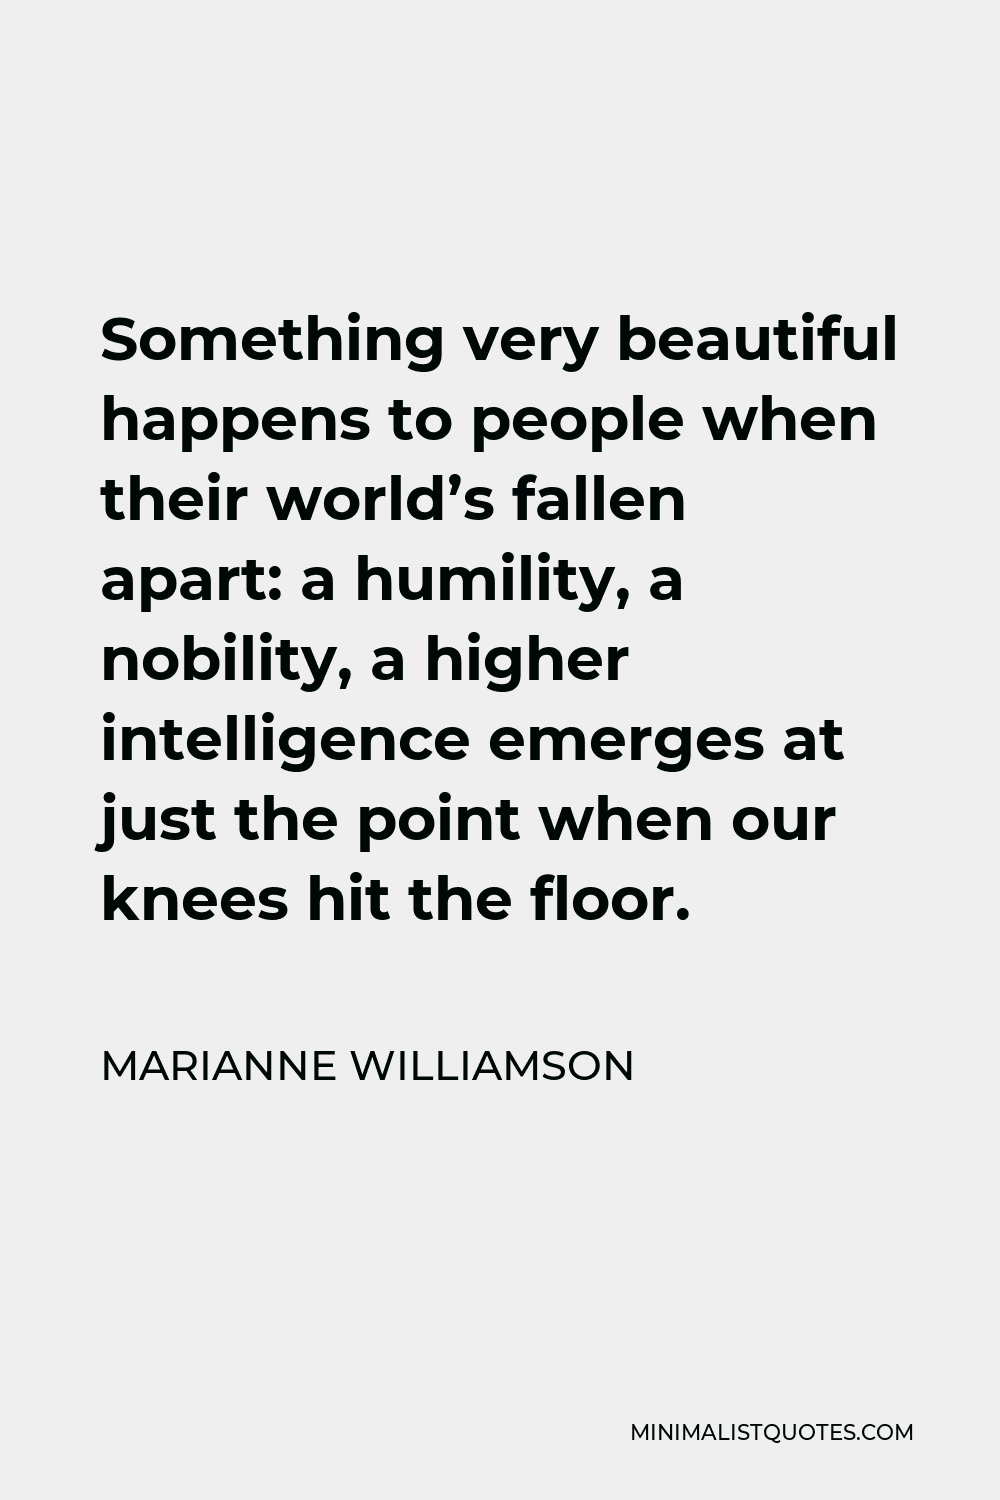 Marianne Williamson Quote - Something very beautiful happens to people when their world’s fallen apart: a humility, a nobility, a higher intelligence emerges at just the point when our knees hit the floor.